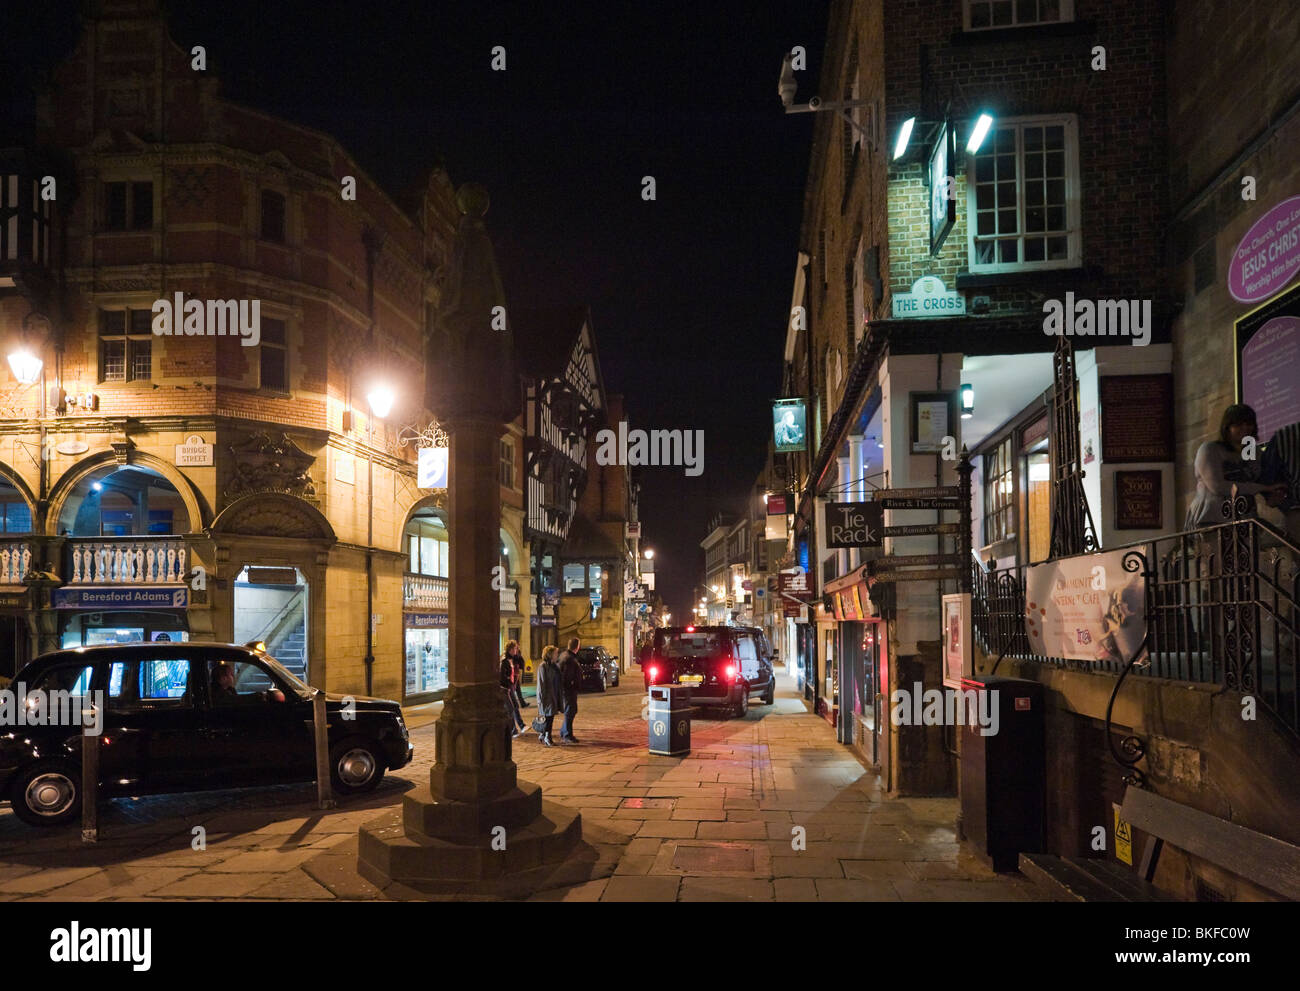 The Cross at night, The Rows, Chester, Cheshire, England, UK Stock Photo